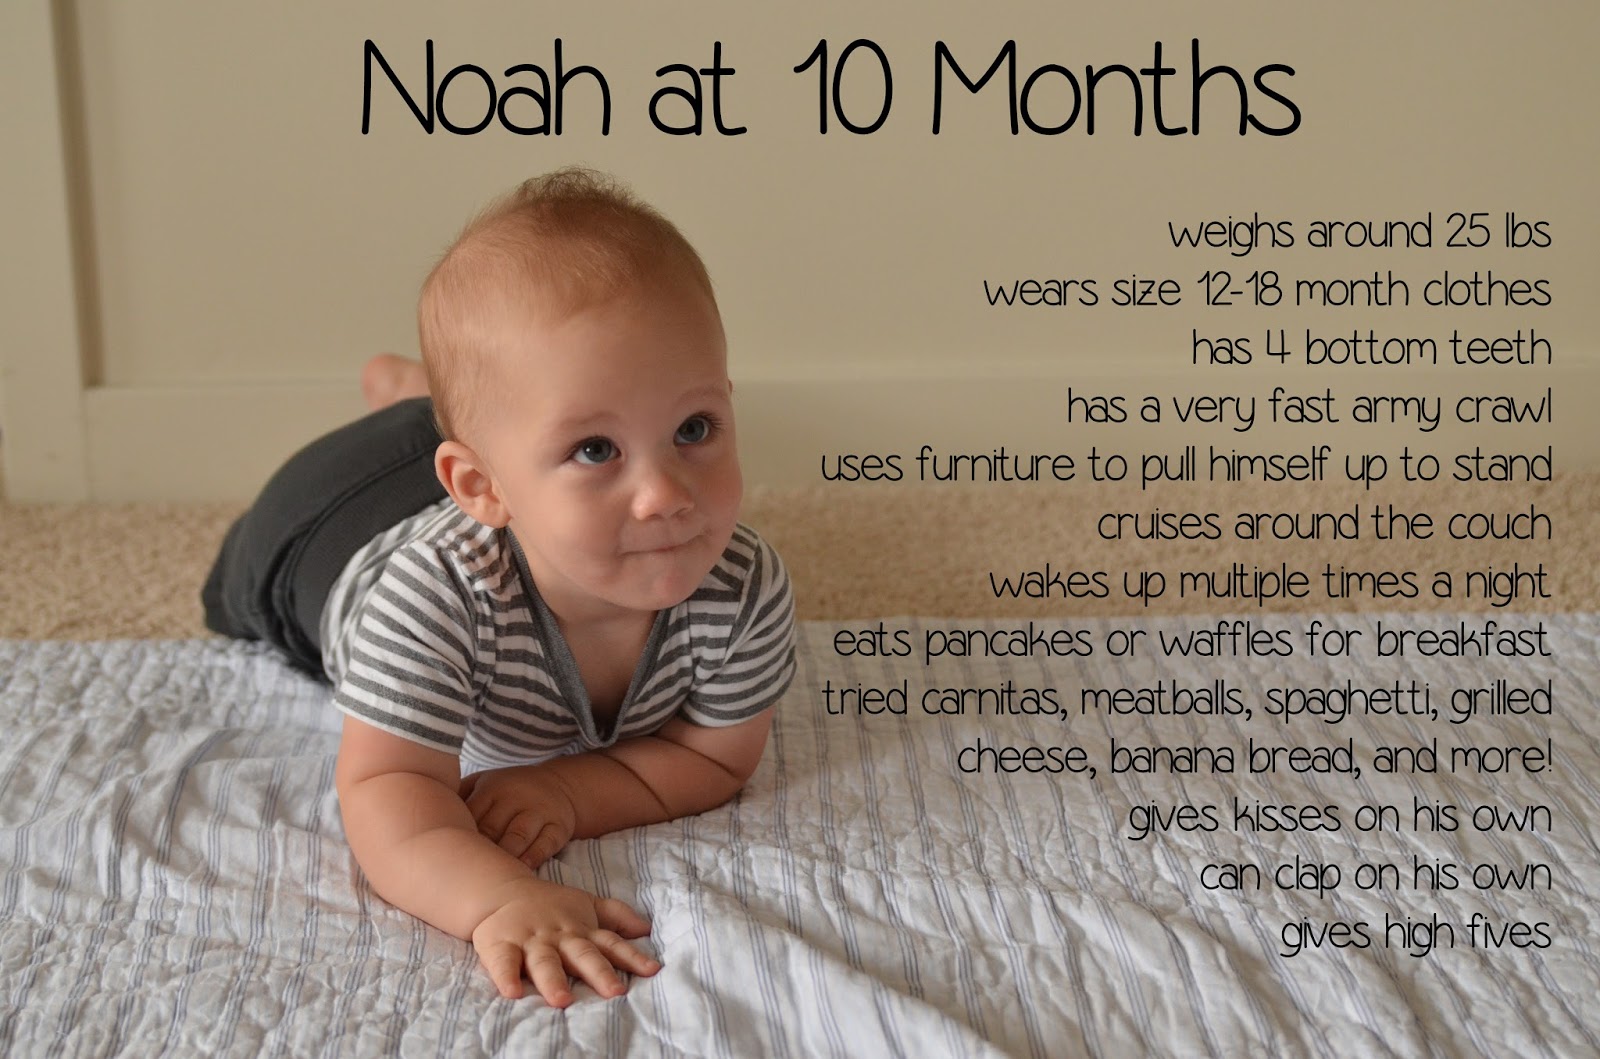 The Adventure Starts Here: Happy 10 Months Noah!